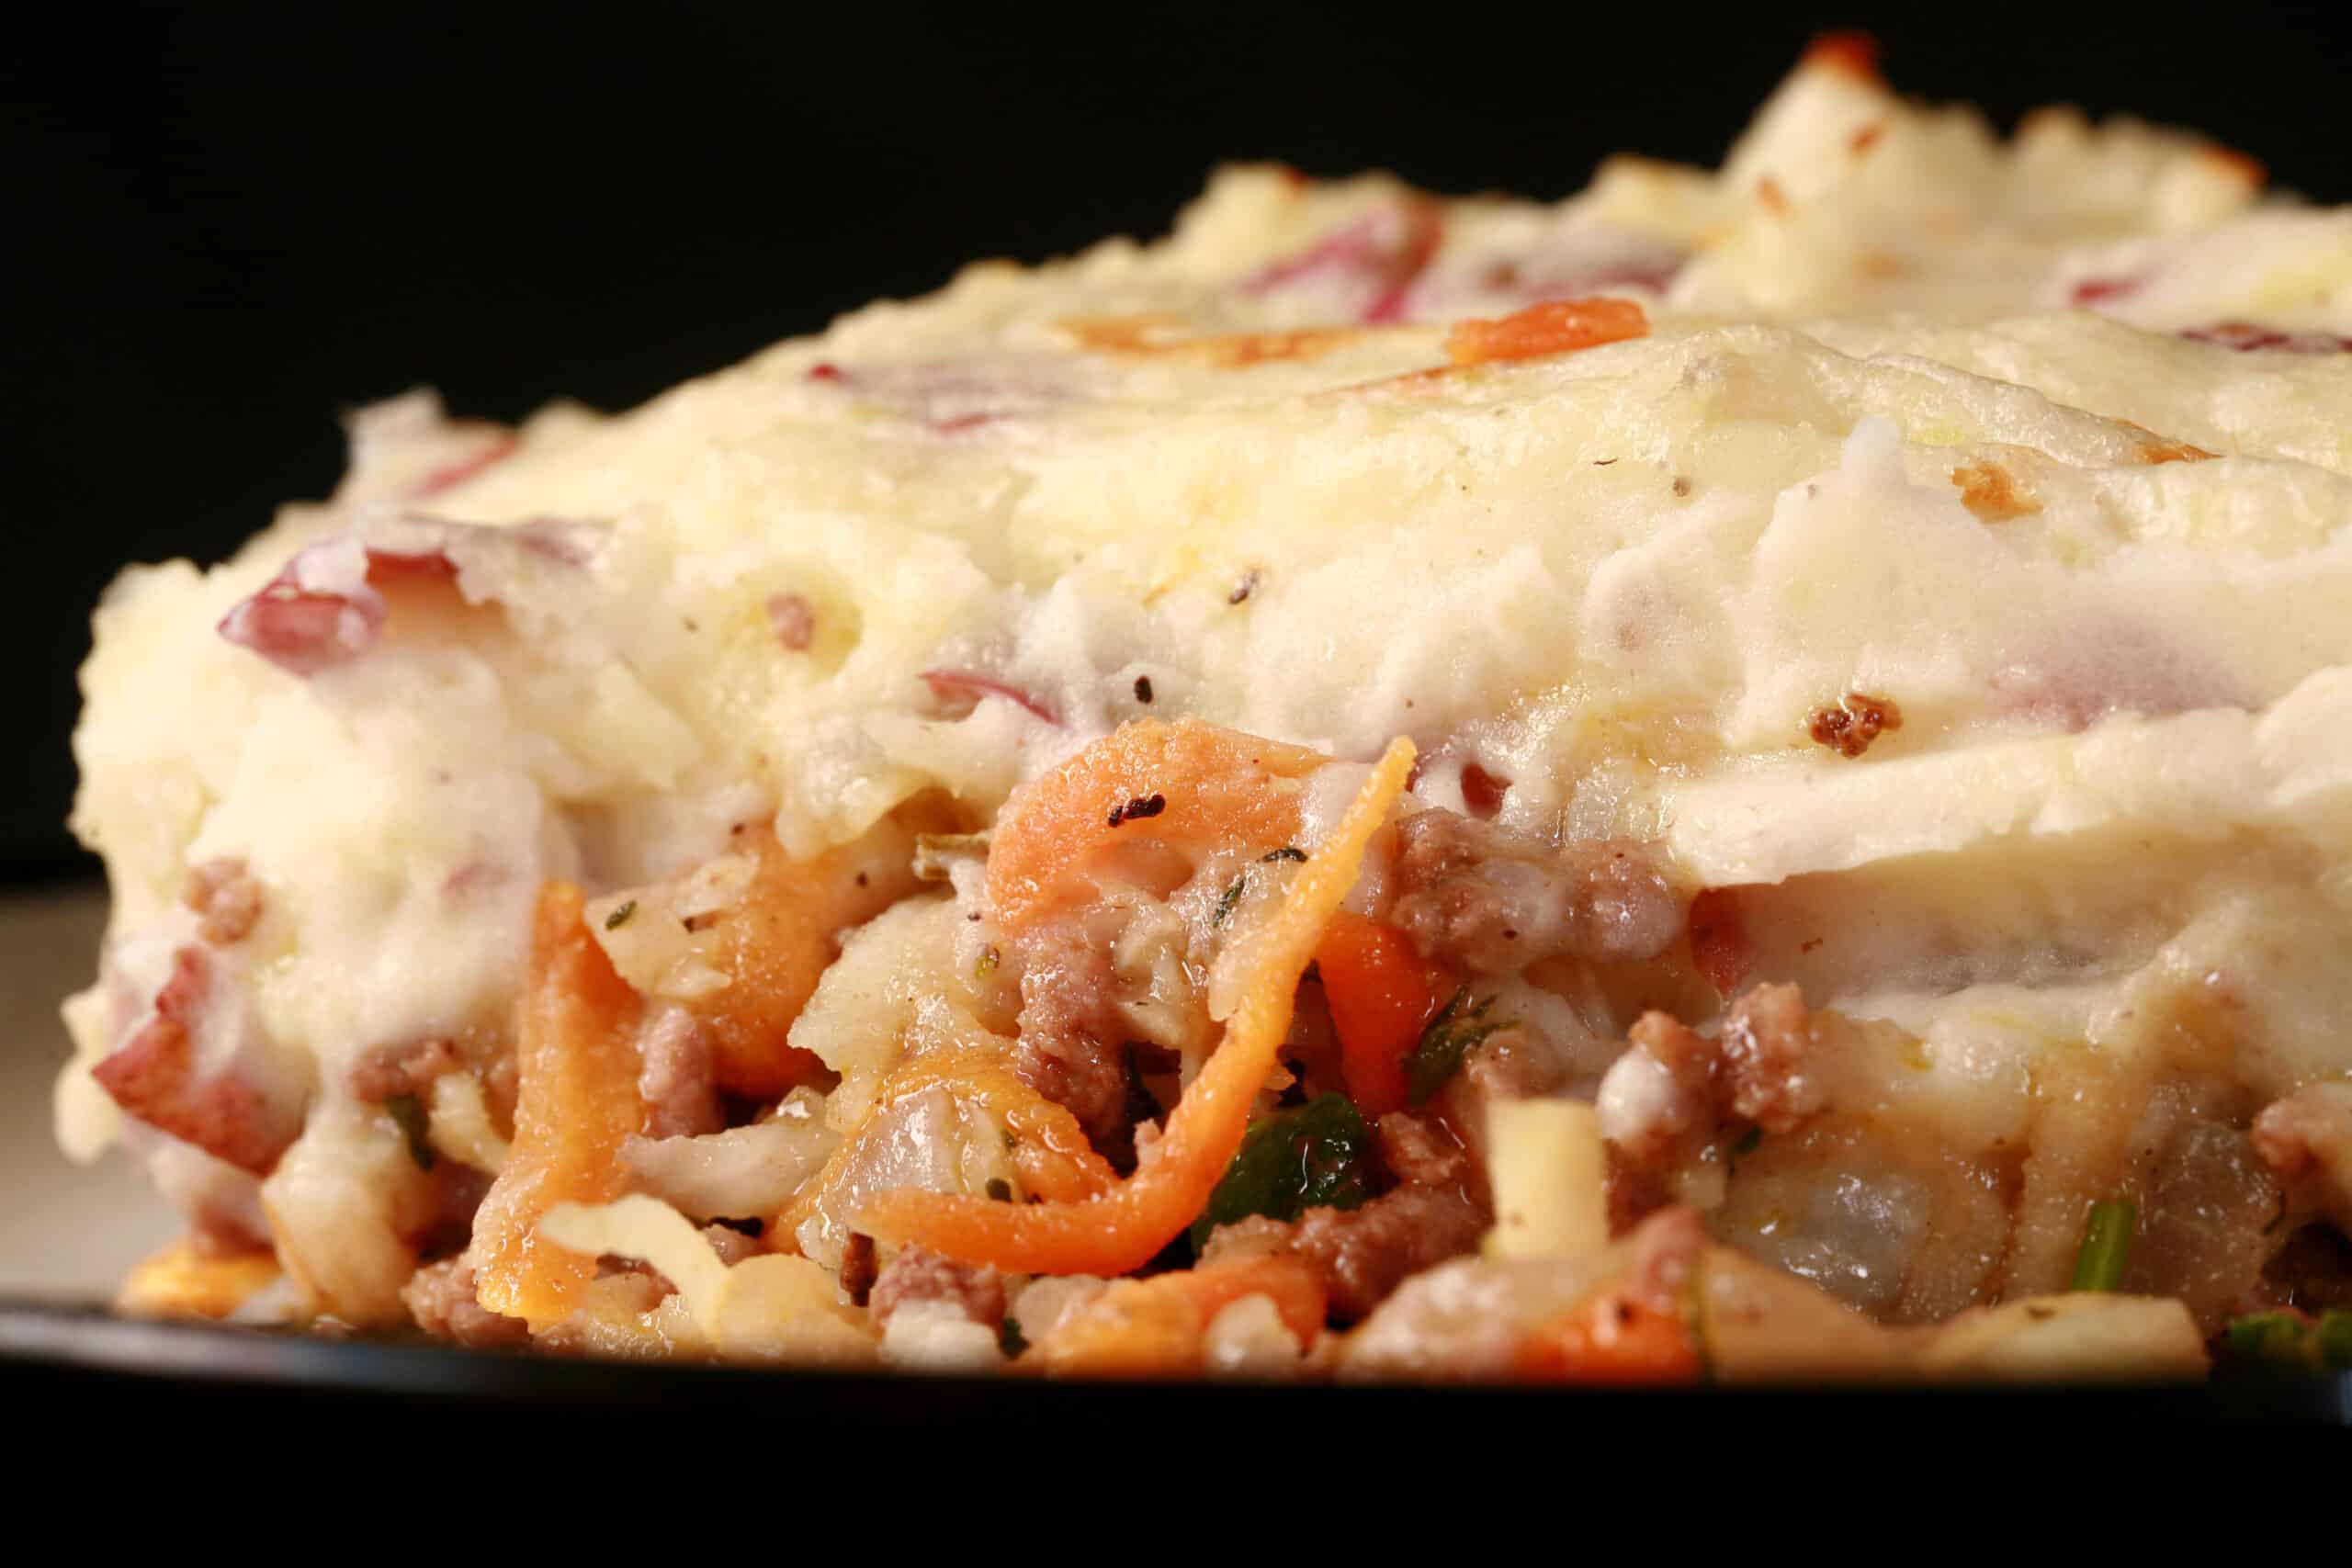 A close up photo of a serving of cottage pie.